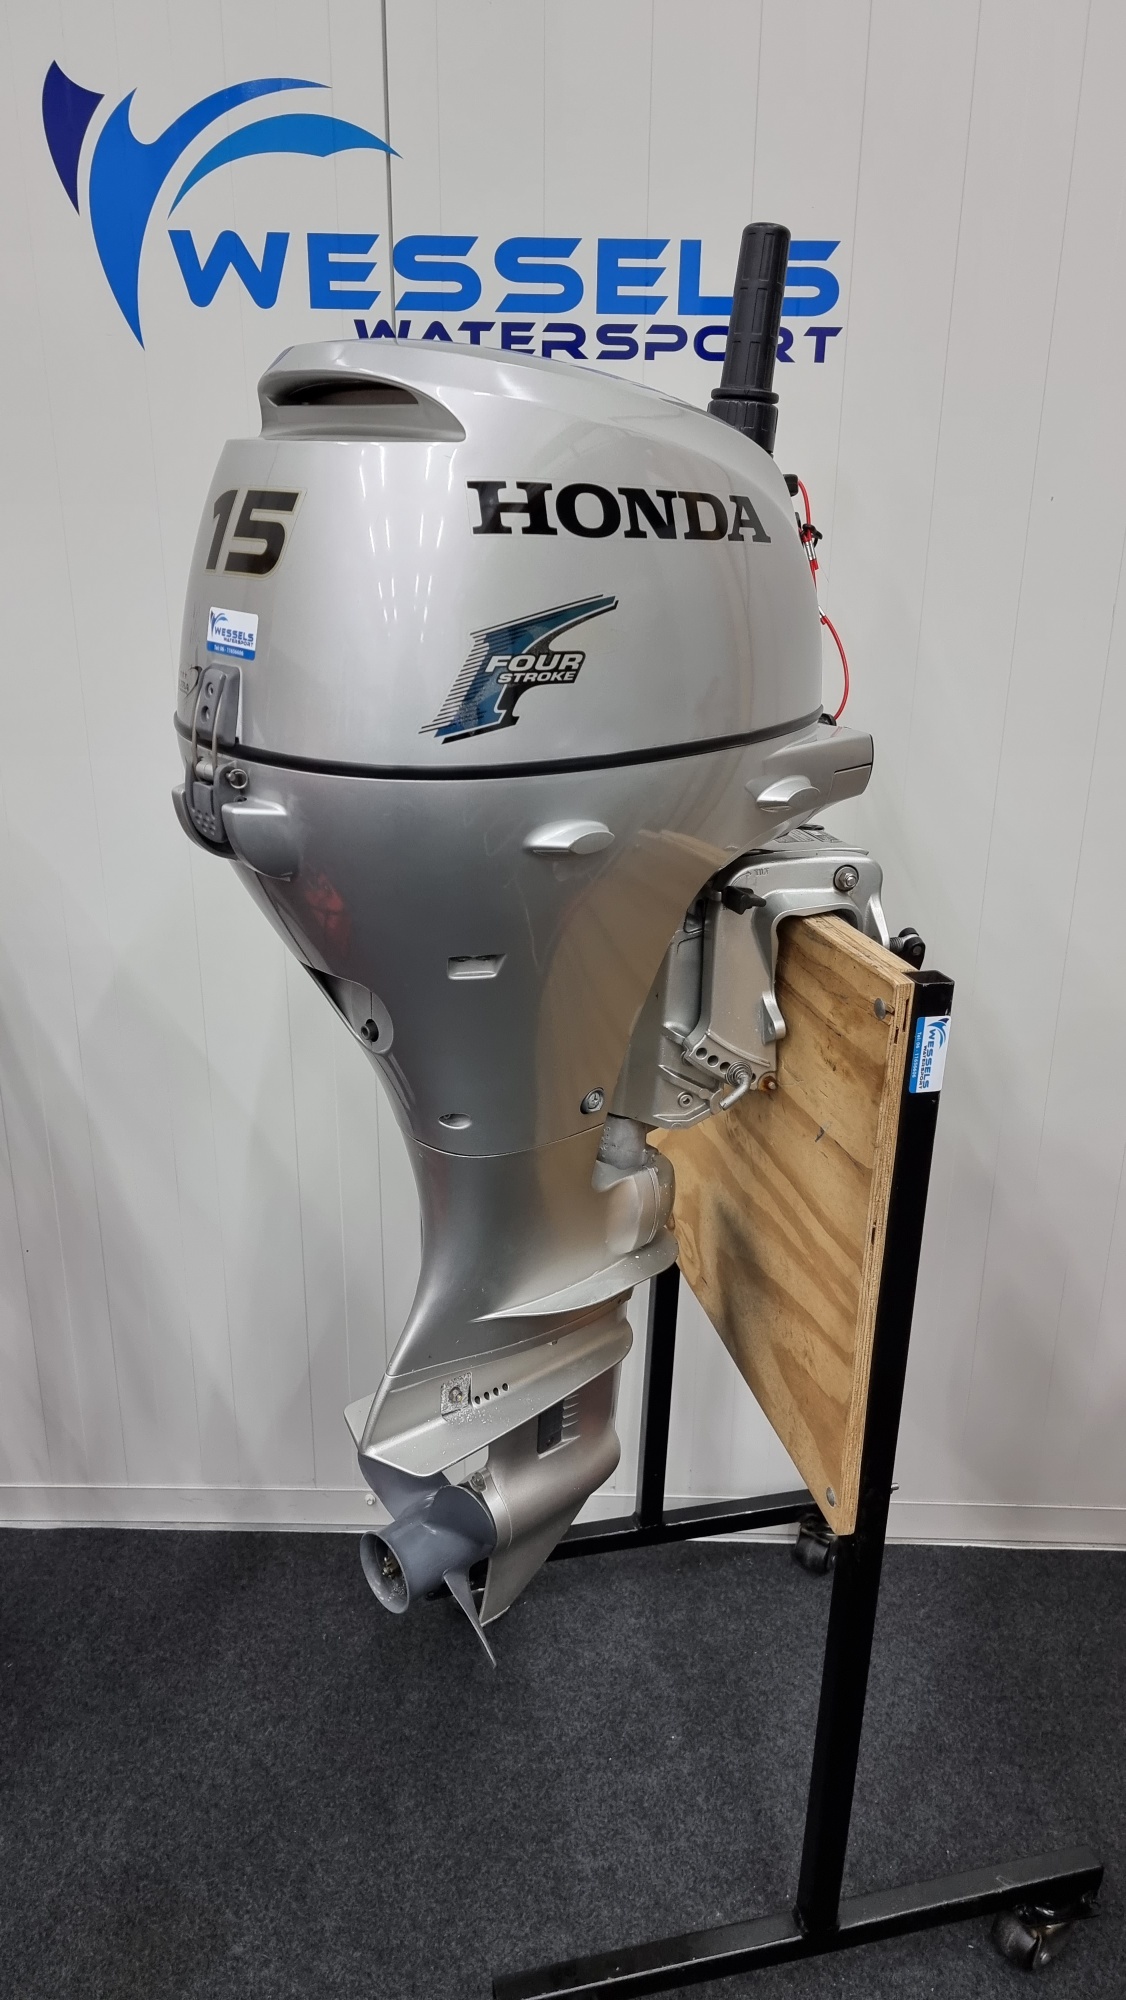 Honda BF 15 S | Wessels Watersport | 20211227 145020 resized